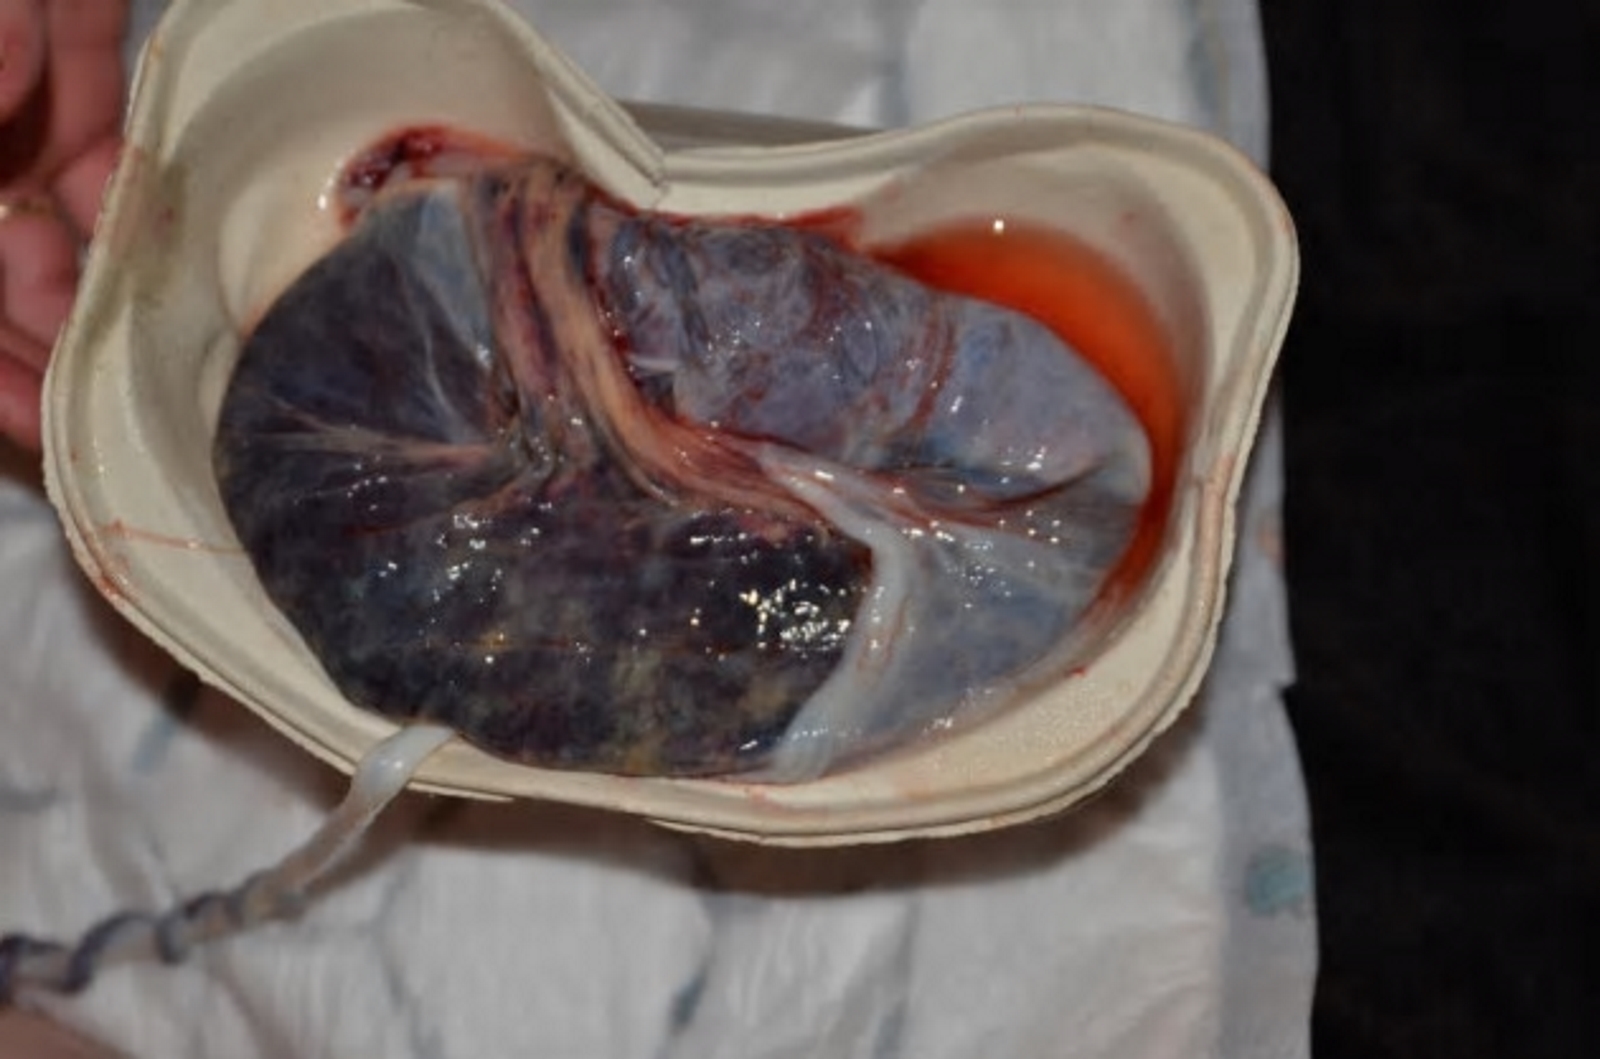 The figure shows a human placenta.